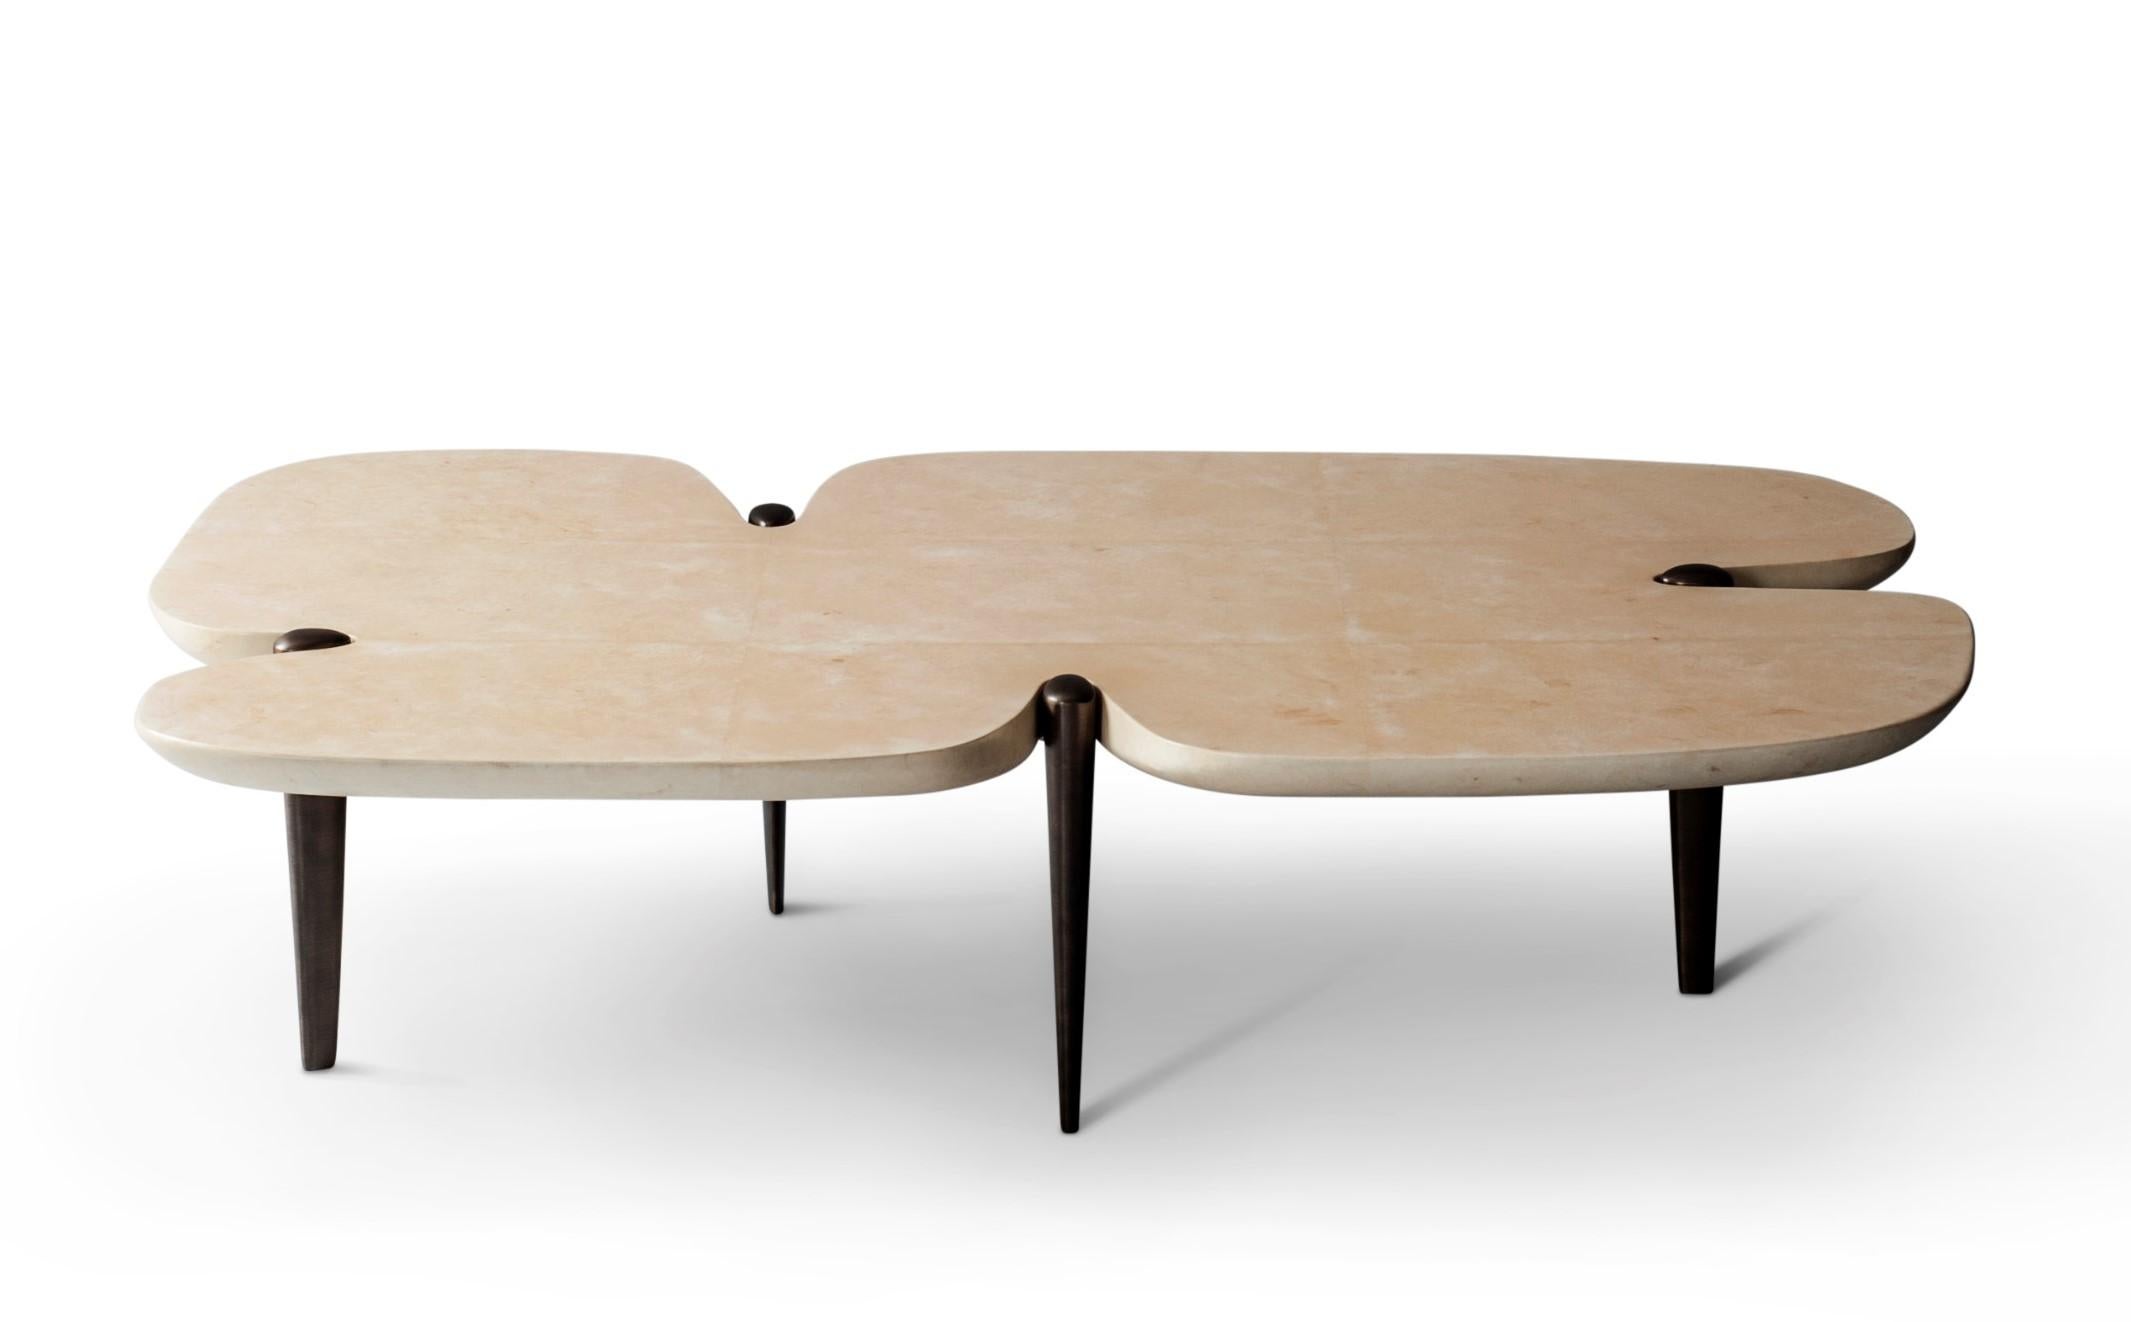 Contour coffee table by DeMuro Das
Dimensions: W 160 x D 99.5 x H 39.5 cm
Materials: Carta (Ivory), matte
Solid bronze (antique) legs

 Dimensions and finishes can be customized.

DeMuro Das is an international design firm and the aesthetic